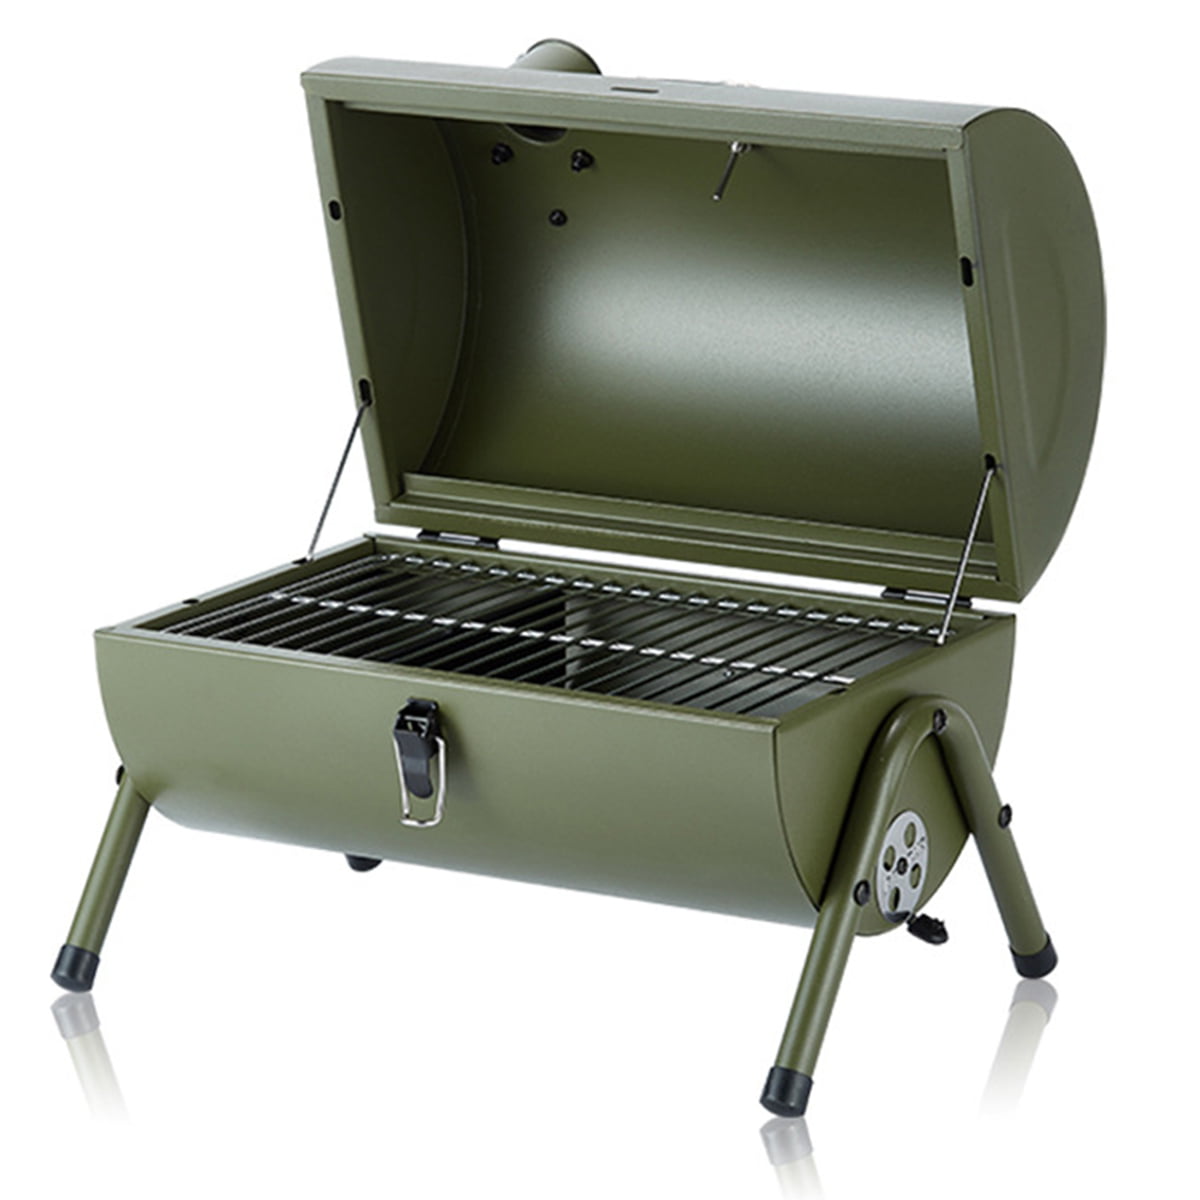 SUNLIFER Portable Charcoal BBQ Grill: Outdoor Small Charcoal Grills with  Meat Smoker Combo for Backyard Patio Barbecue | Outdoor Smoking | Camping  BBQ